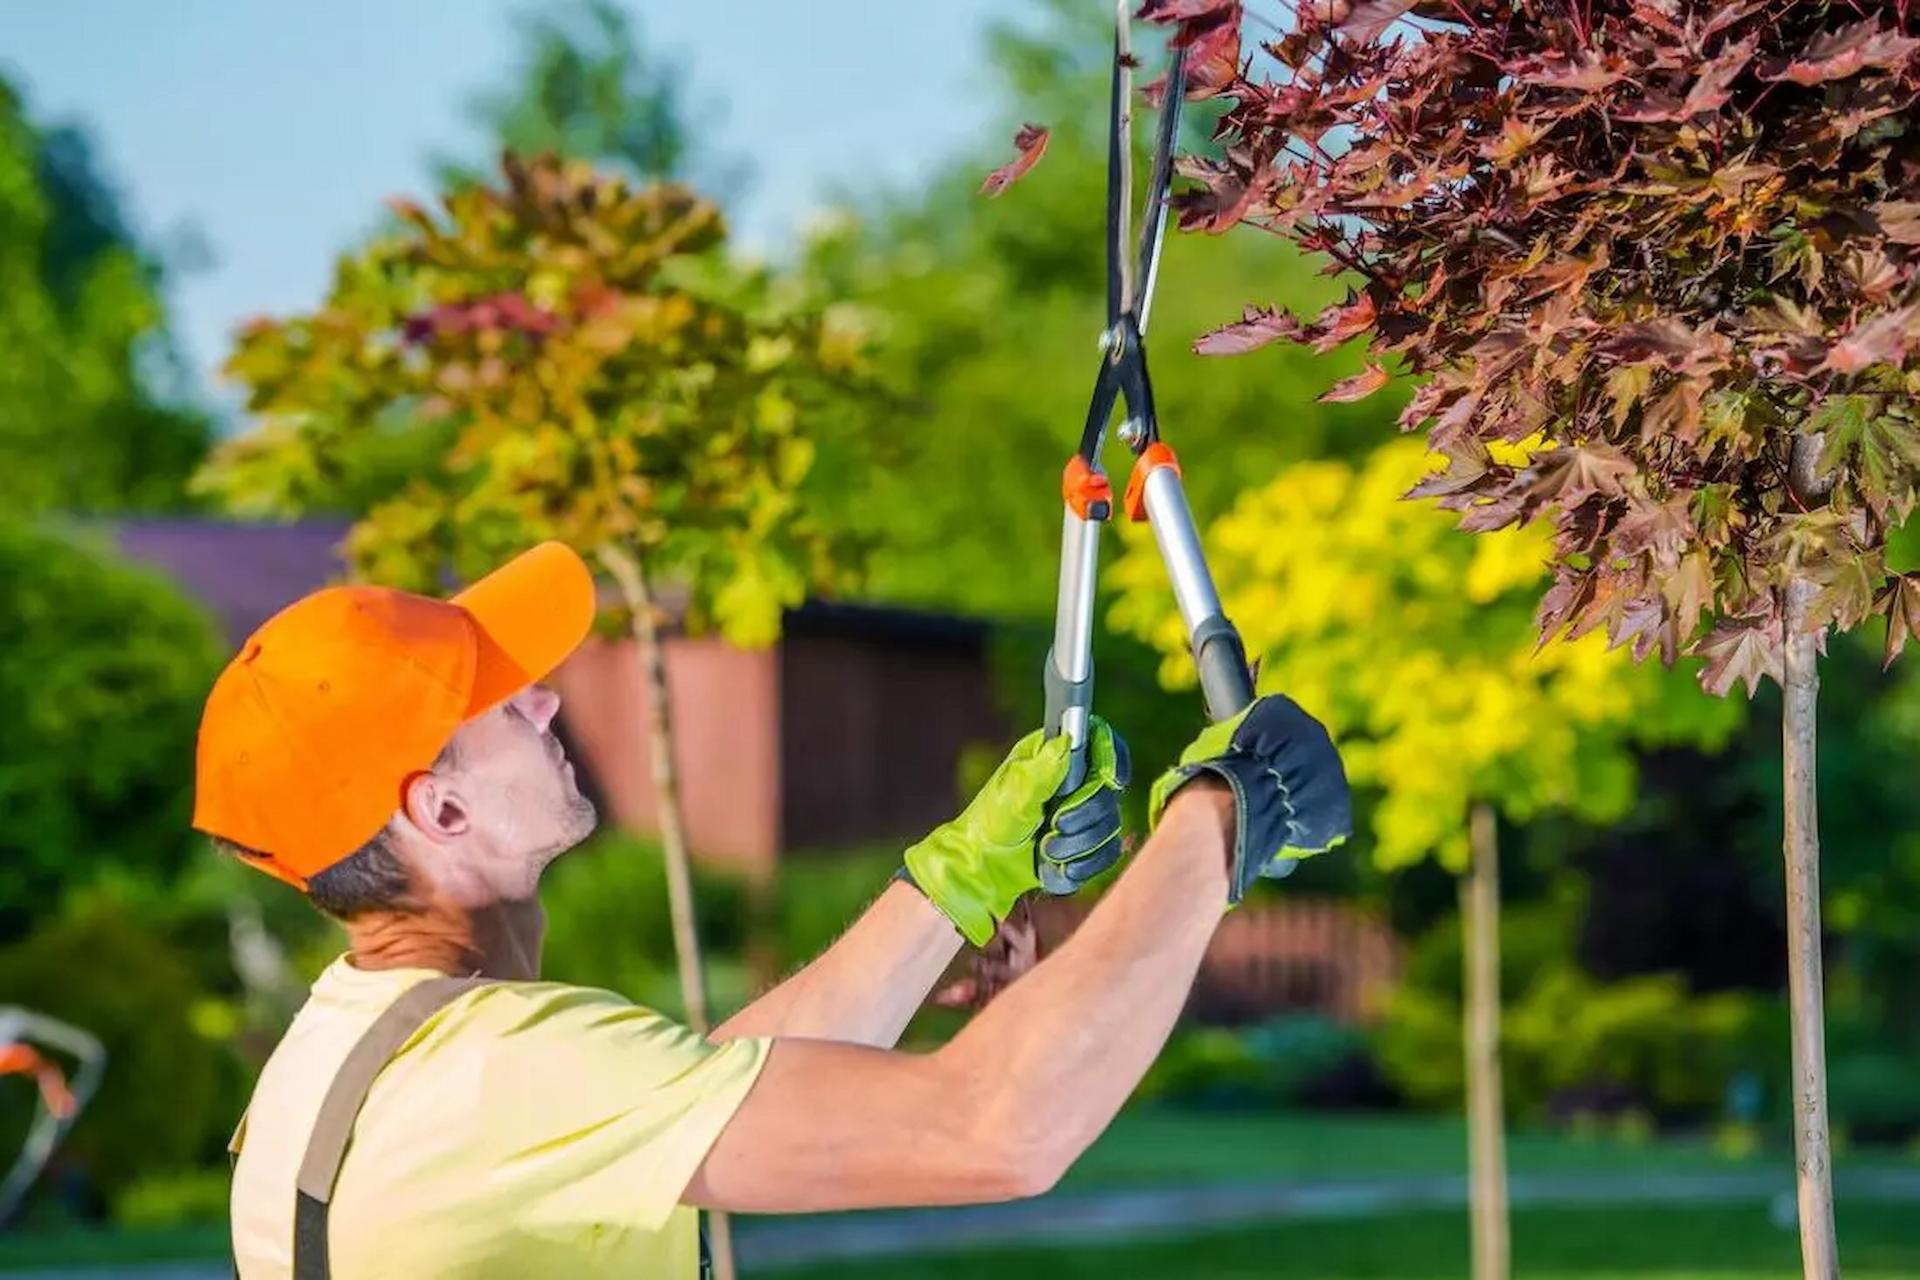 What Should You Look For In Tree Care Service Providers?